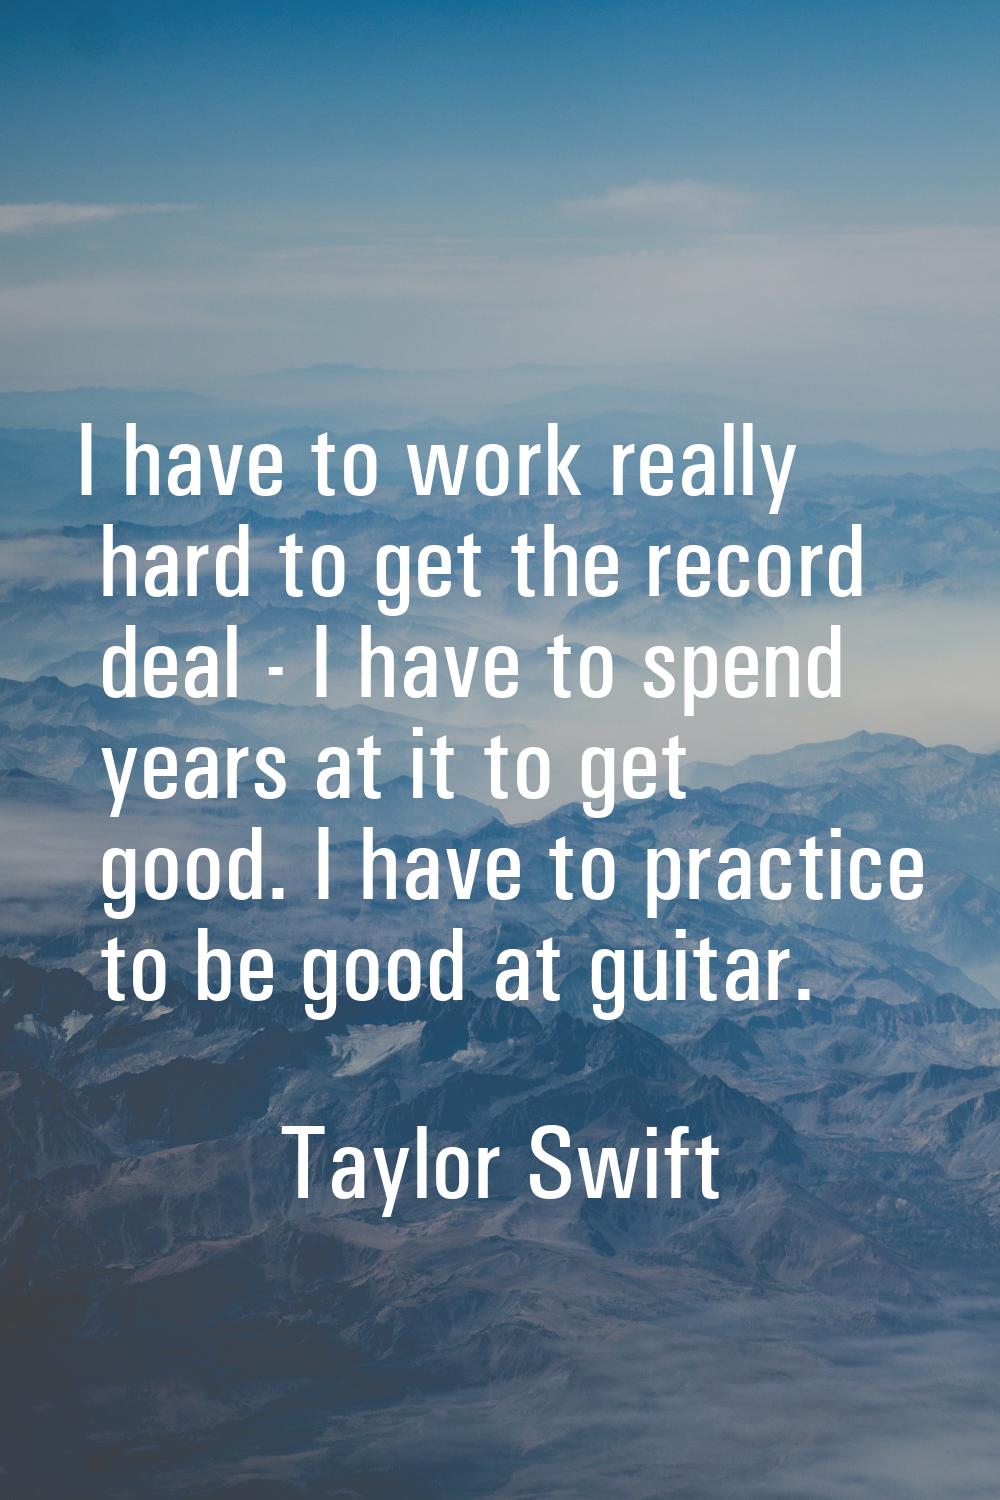 I have to work really hard to get the record deal - I have to spend years at it to get good. I have